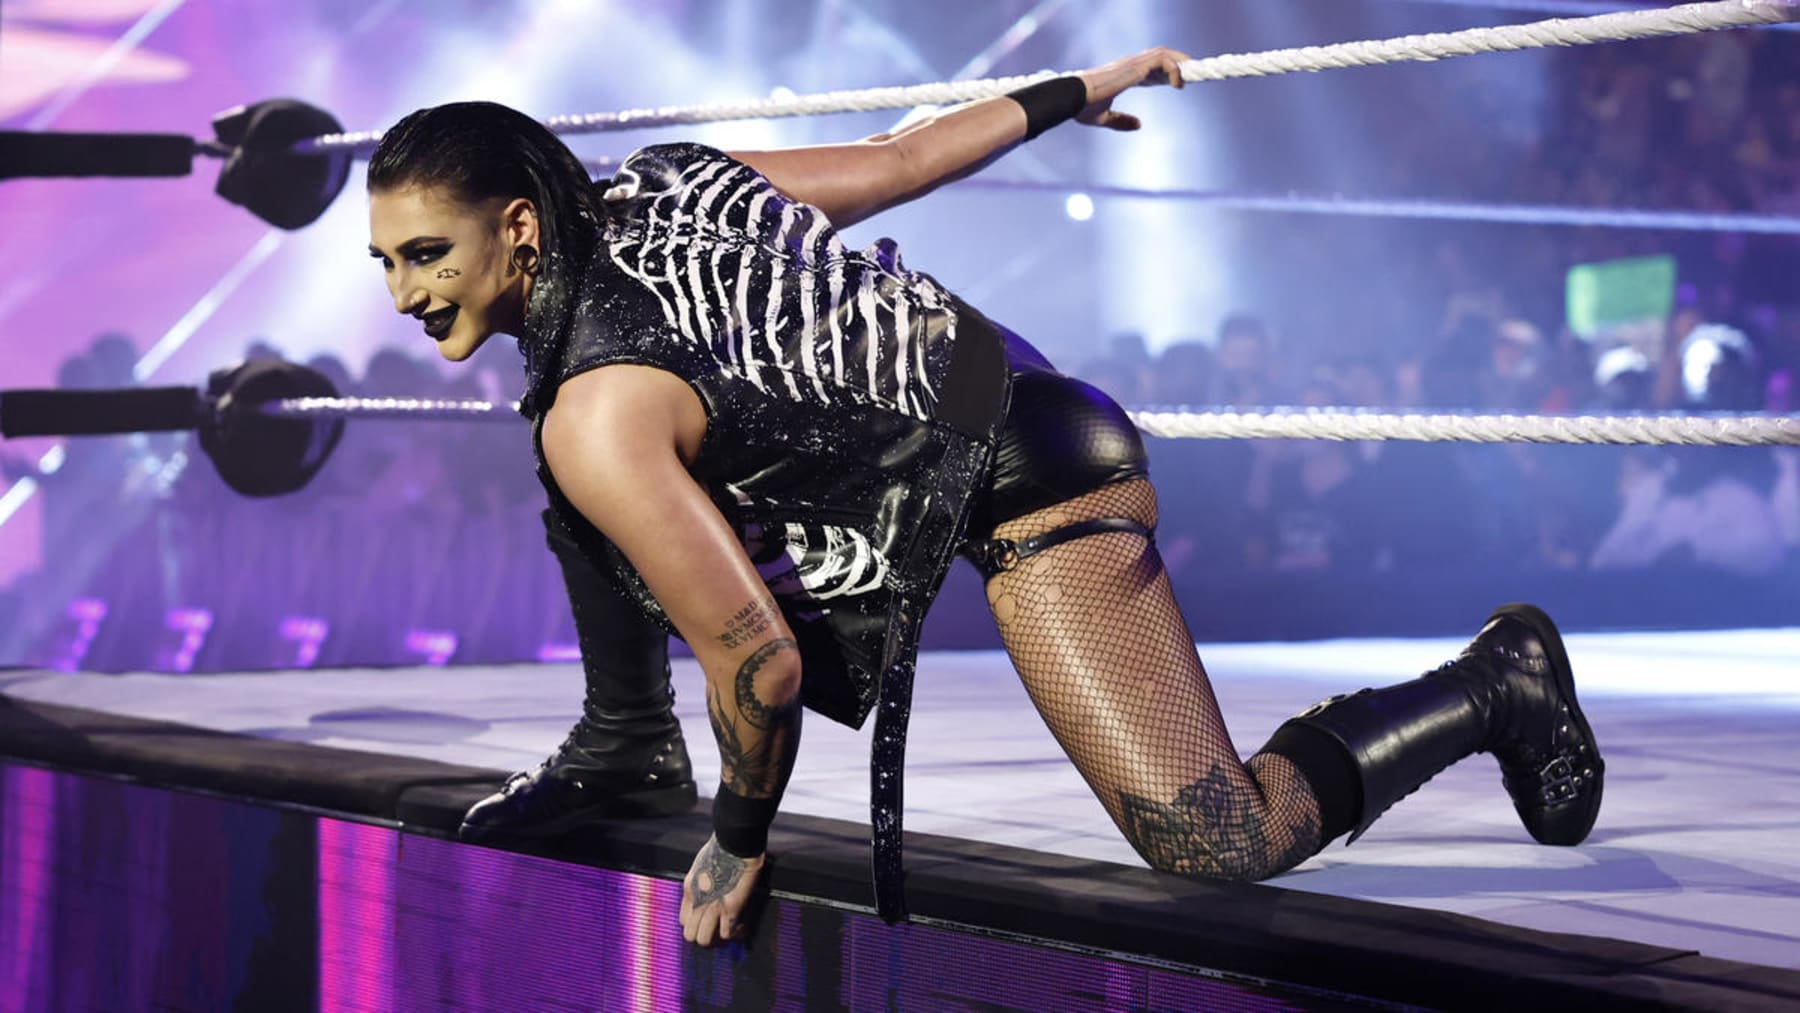 Top 10 Toughest WWE Female Wrestlers of All Time